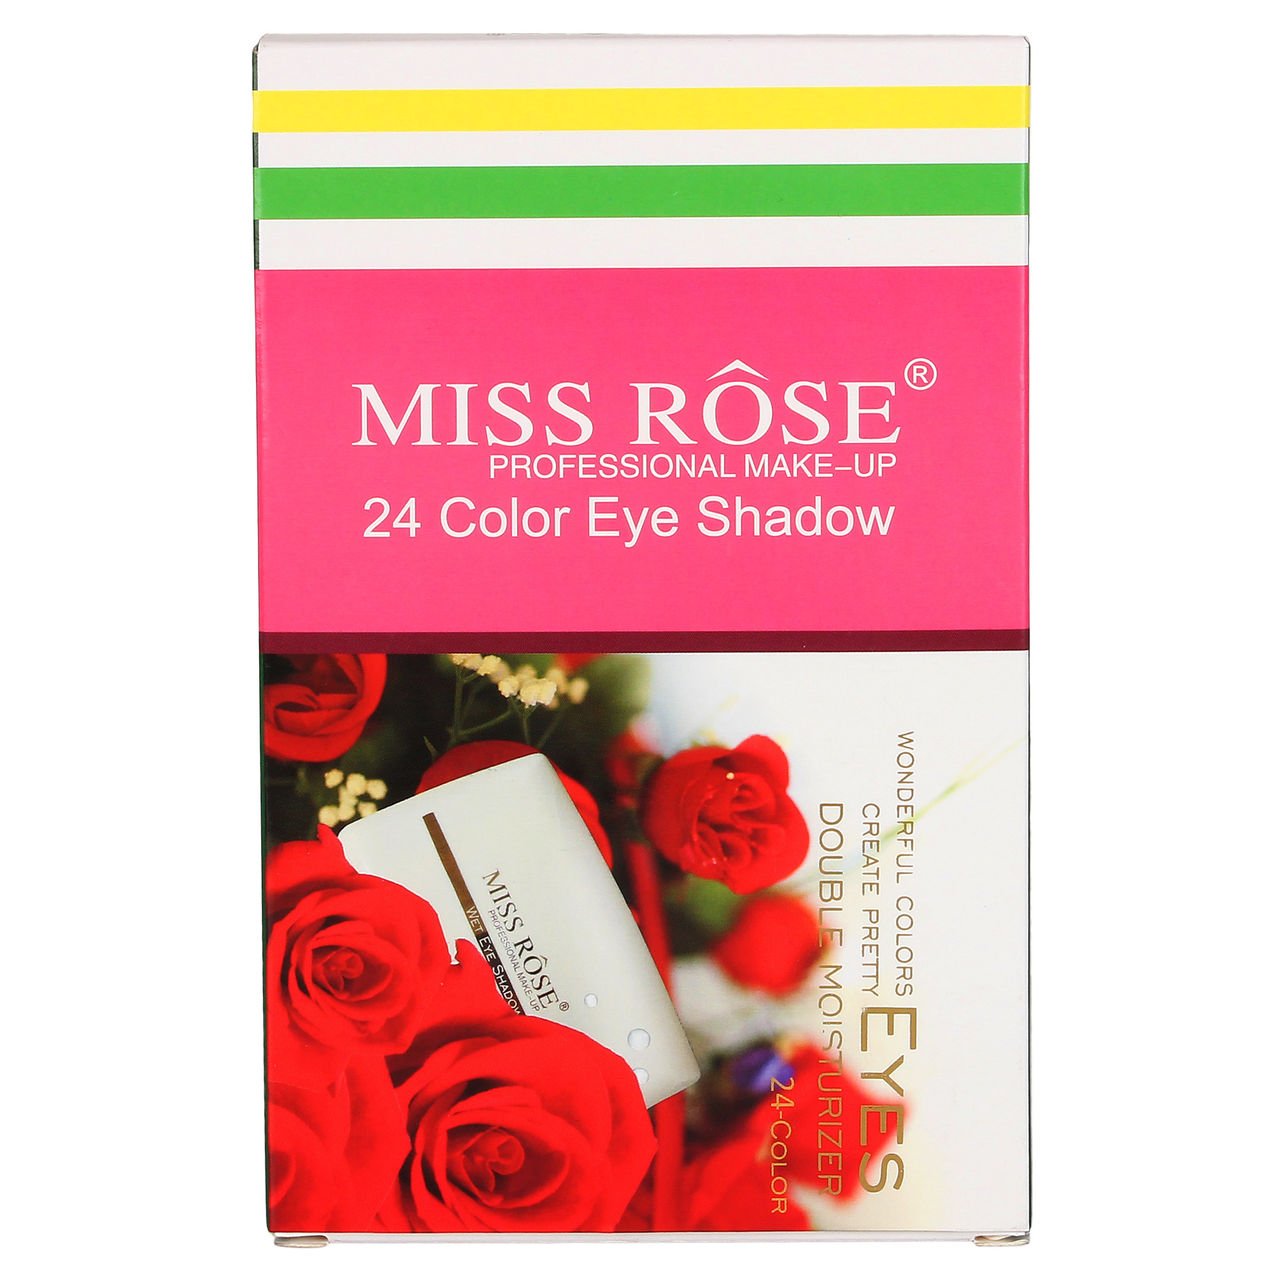 Miss Rose Professional Make-Up 24 Color Eye Shadow